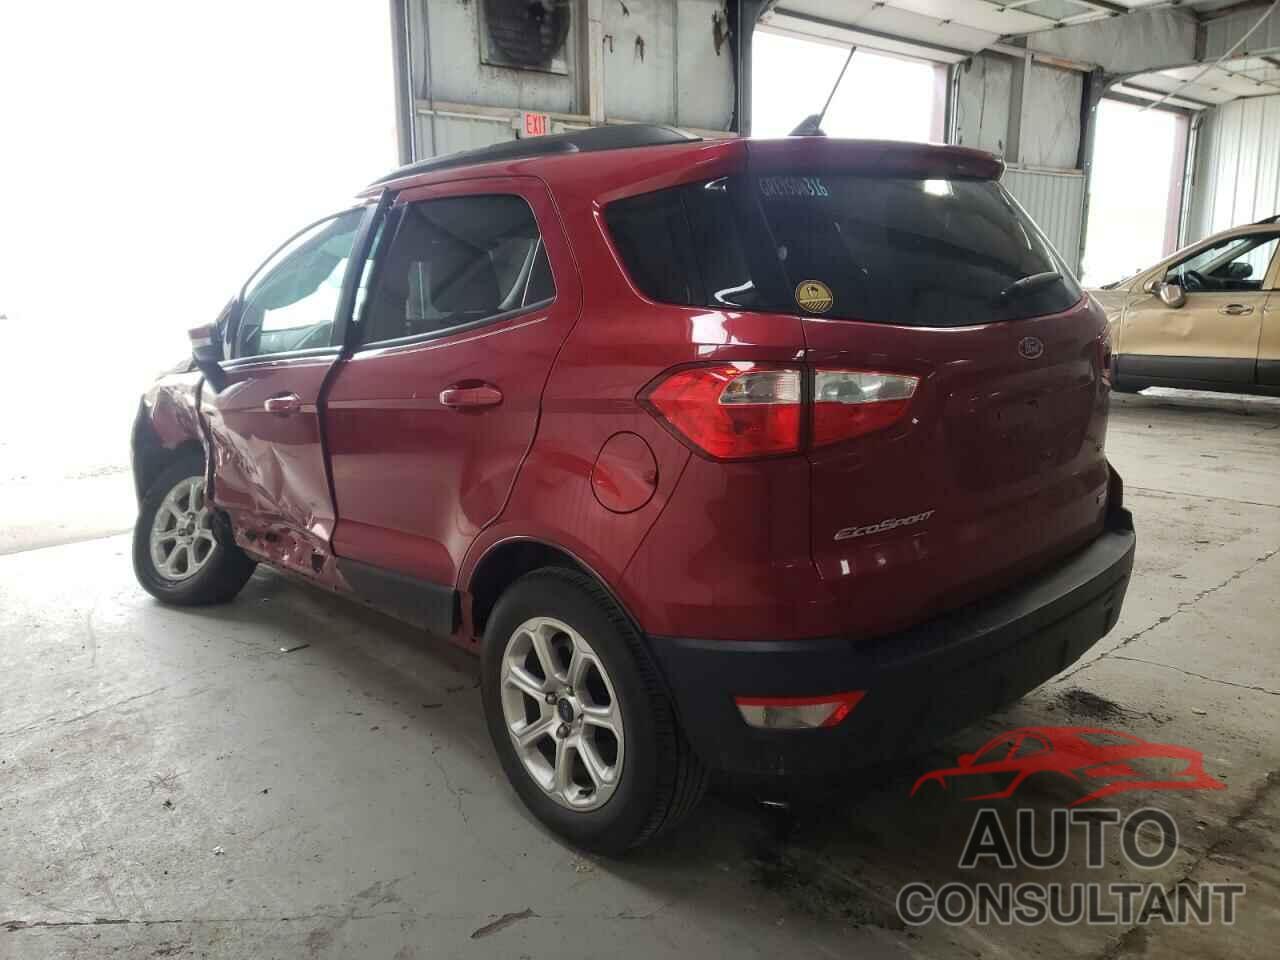 FORD ALL OTHER 2018 - MAJ3P1TE7JC175096